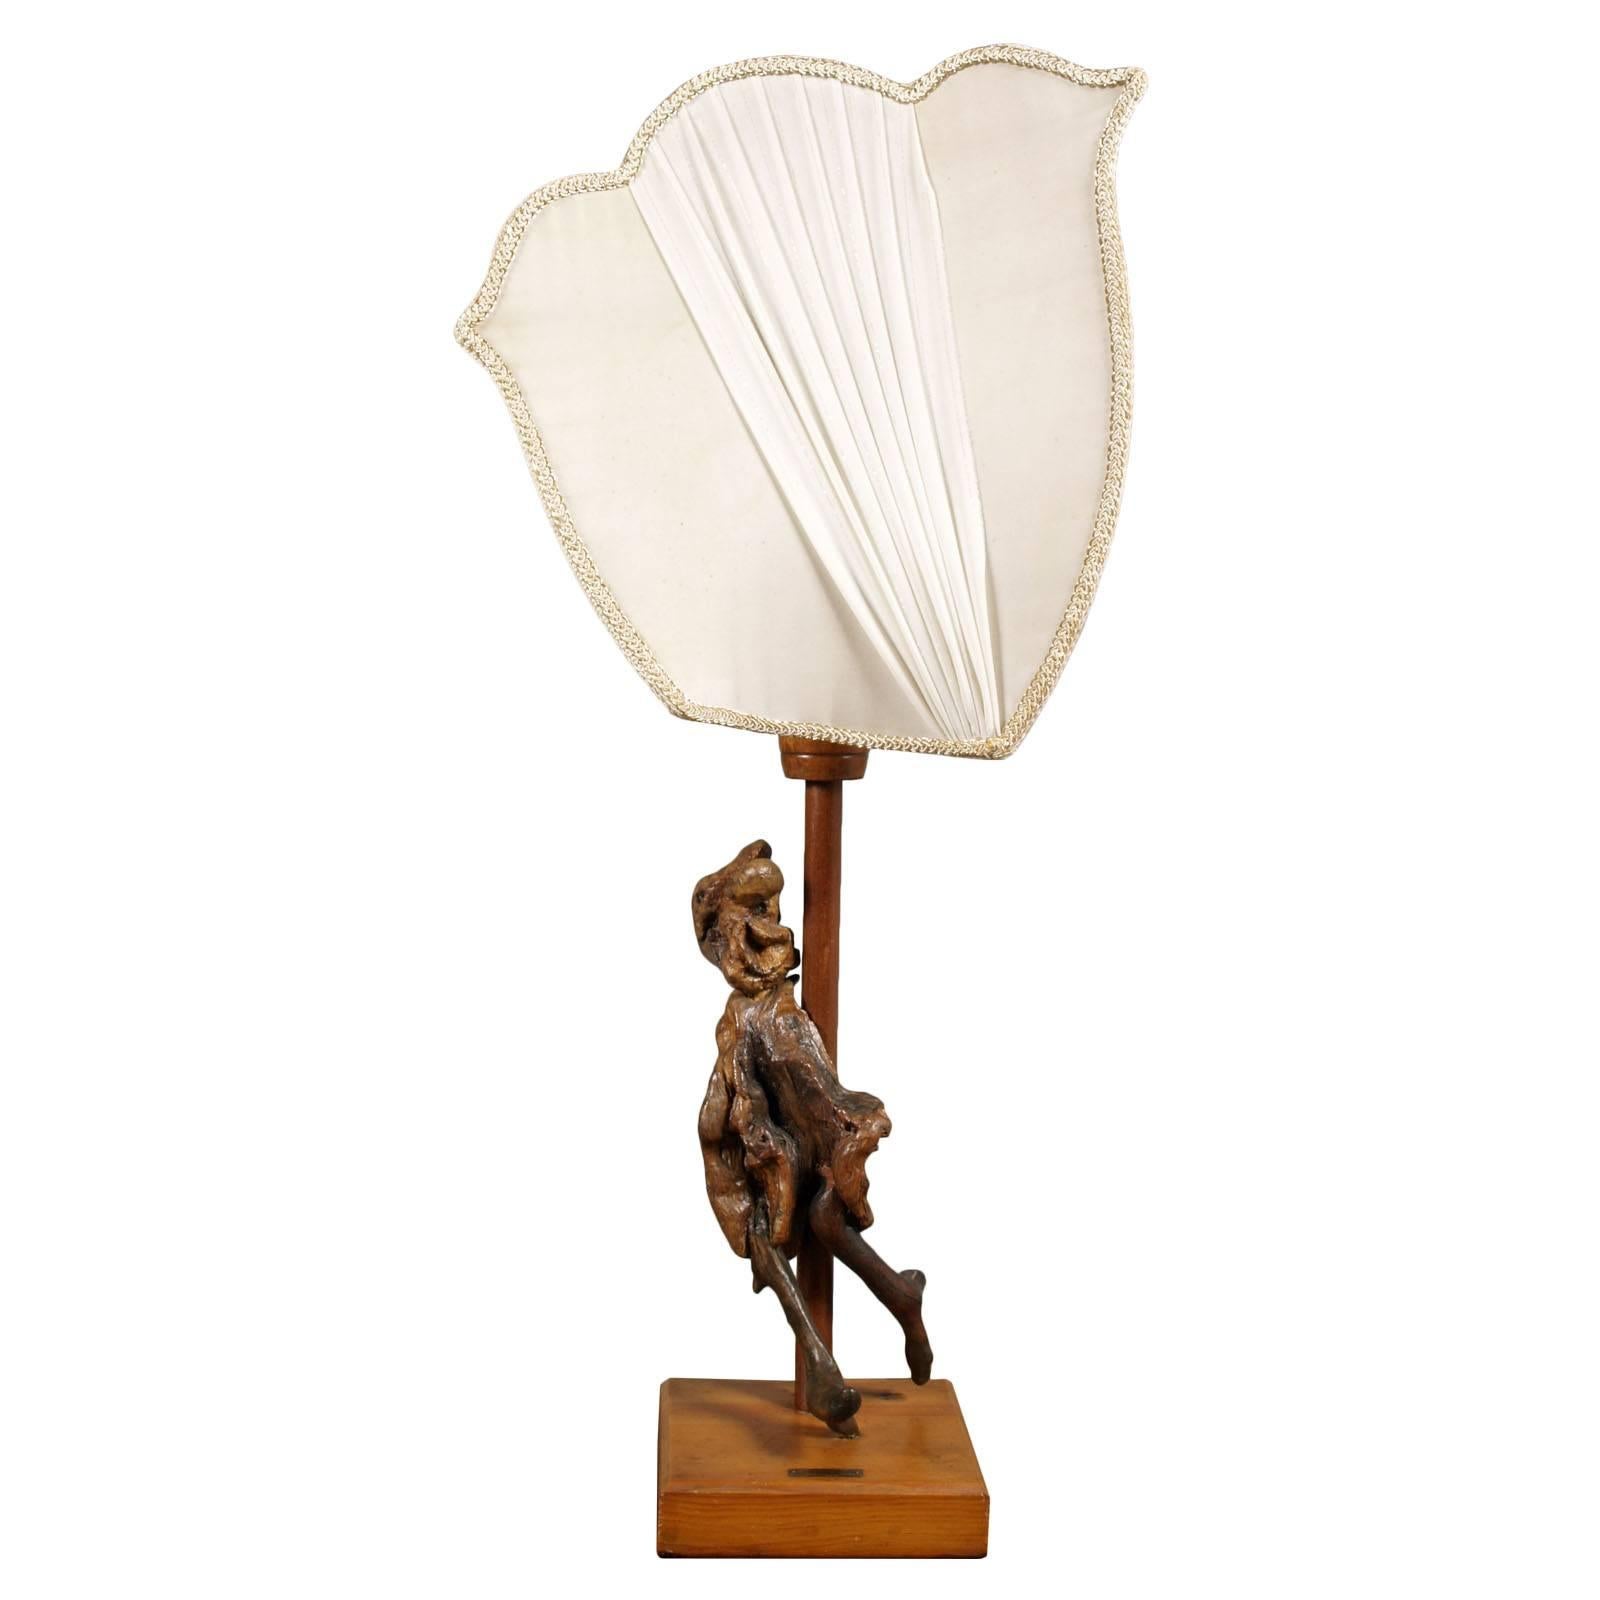 Table lamp and sculpture belonging to the famous Italian cellist.

Measures in cm: Statue cm 40 Lamp cm 82 Basis cm 18 x 18

Notes
Giovanni Lauro Malusi was born in Cervia on July 8, 1922. He graduated in Cello in 1947 at the Monteverdi Music